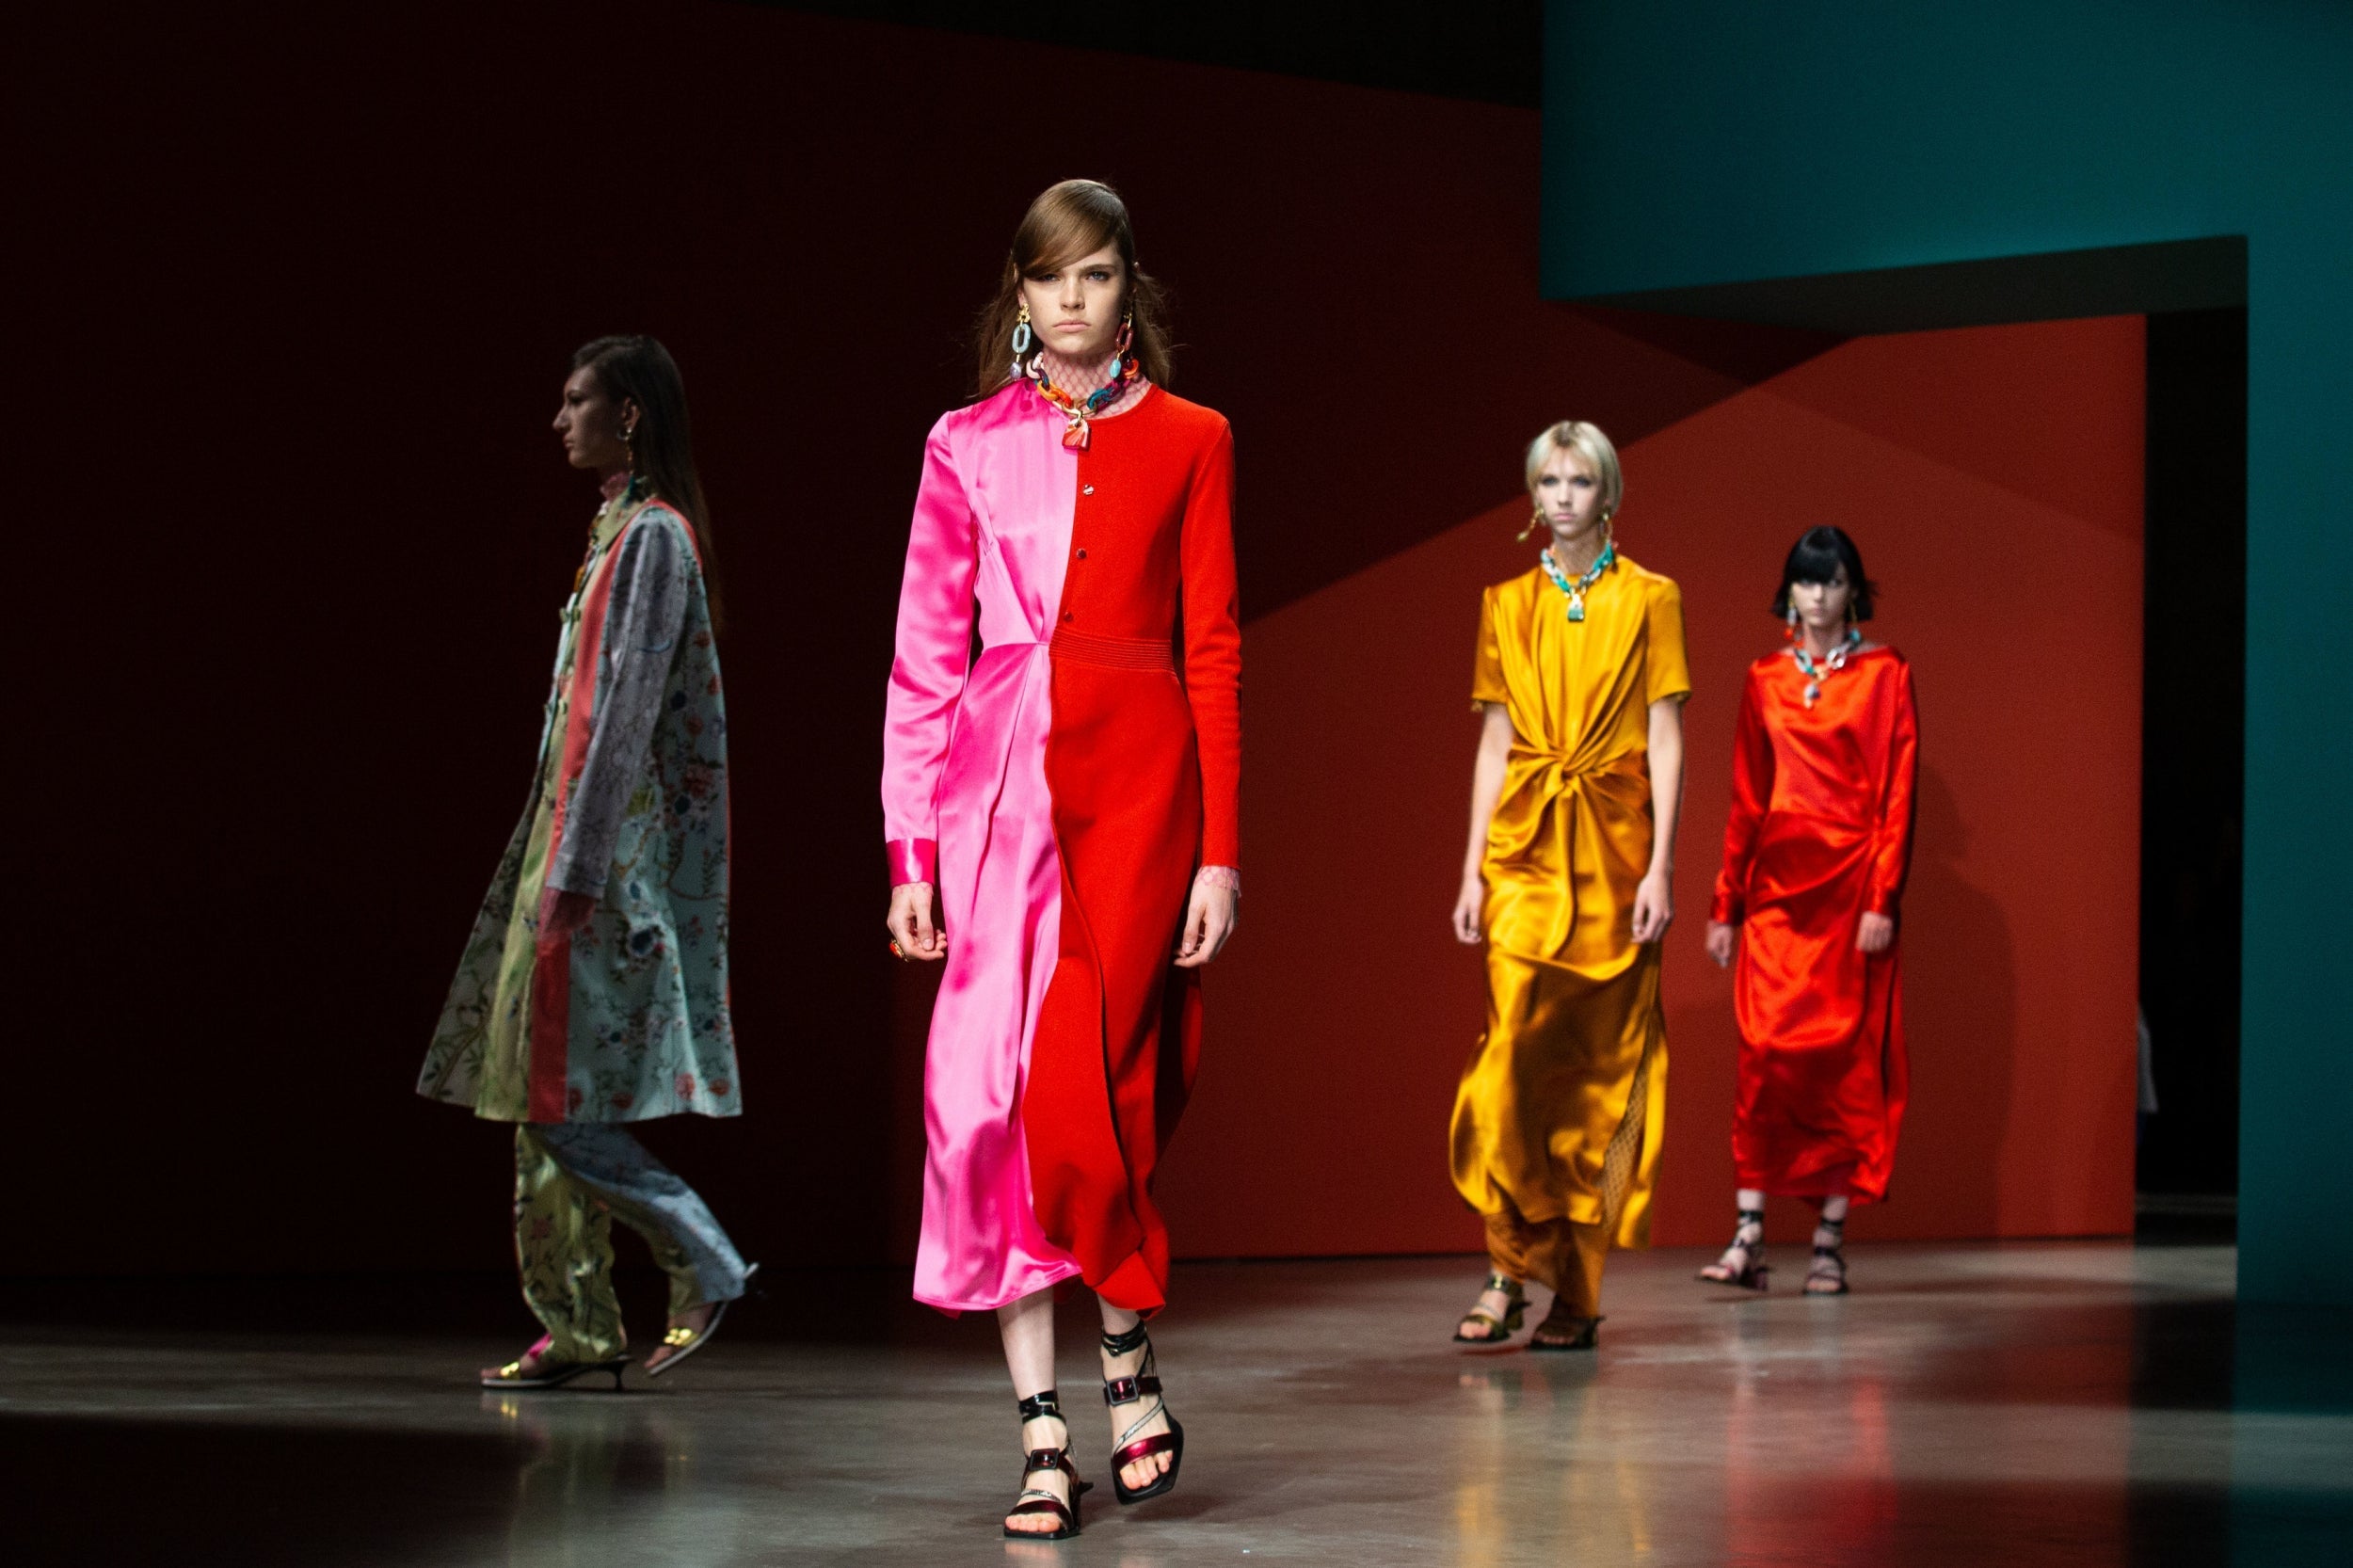 The Ports 1961 collection featured vibrant, jewel-toned dresses